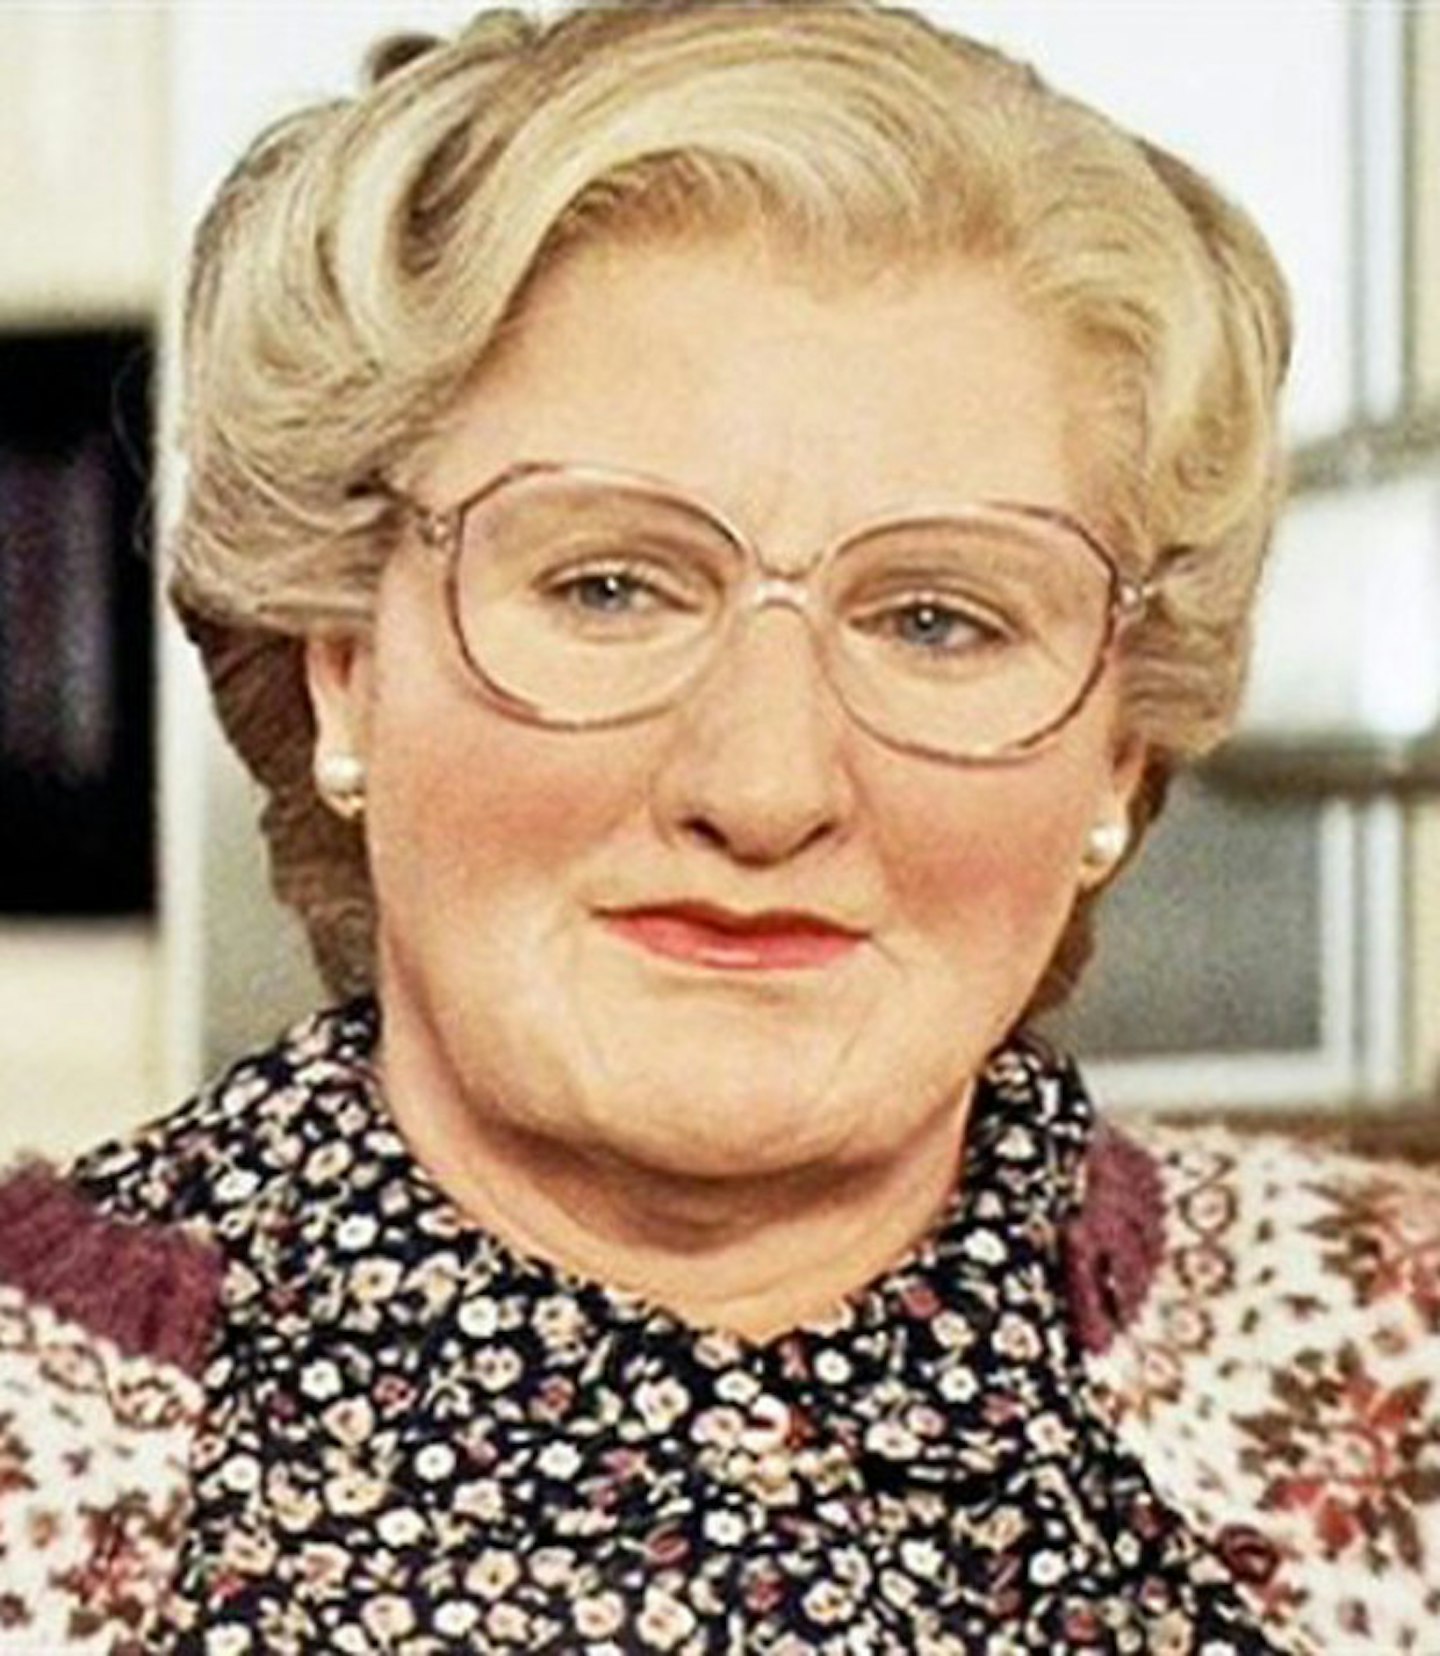 On working on the set of Mrs Doubtfire